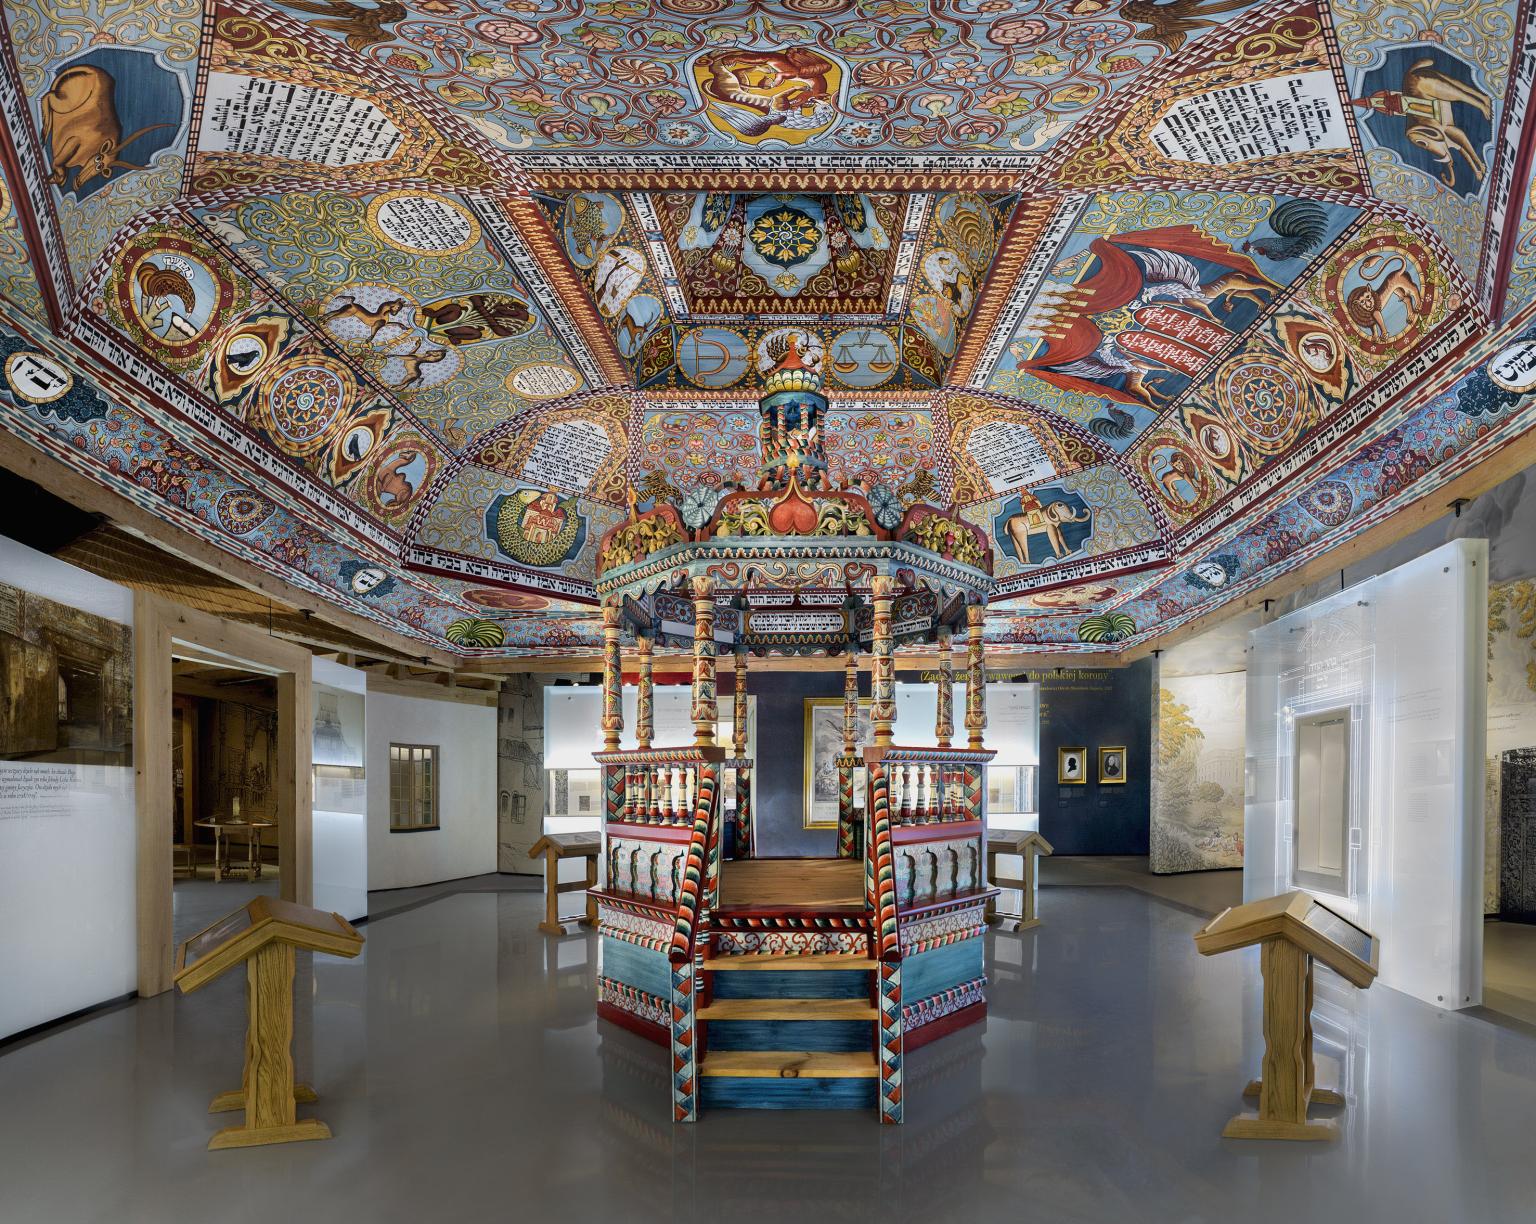 Photograph of room with mural ceiling of floral patterns, animals, and panels of Hebrew text, and painted canopied platform in center of room.  